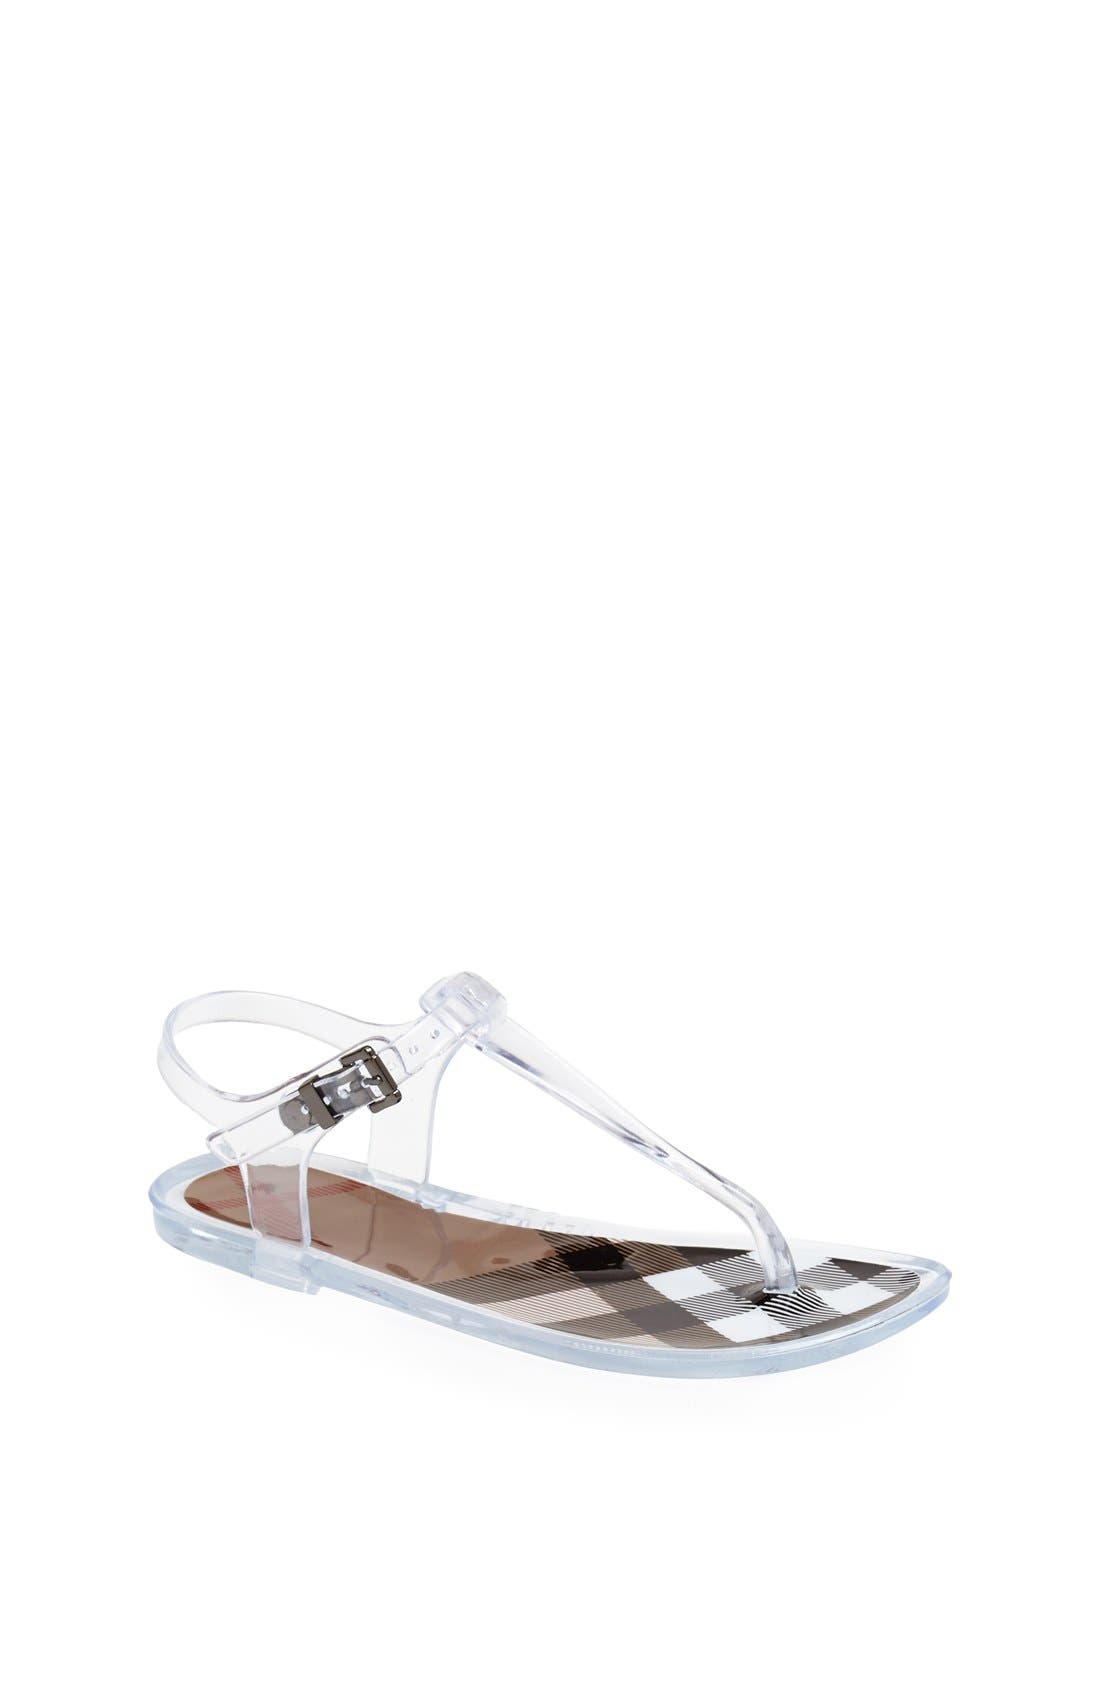 burberry jelly sandals